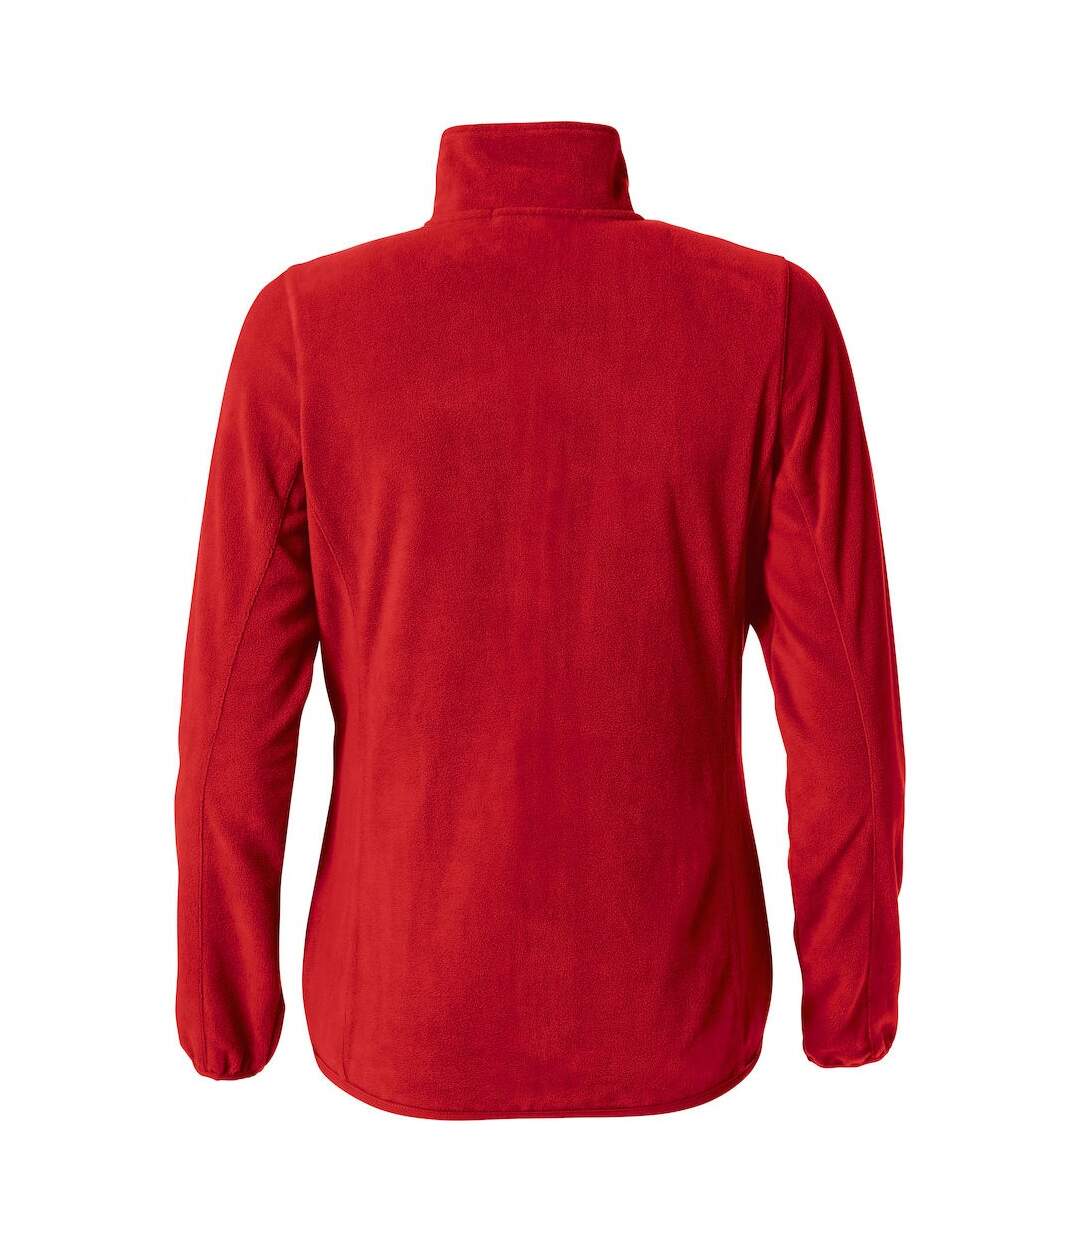 Clique Womens/Ladies Basic Microfleece Jacket (Red)